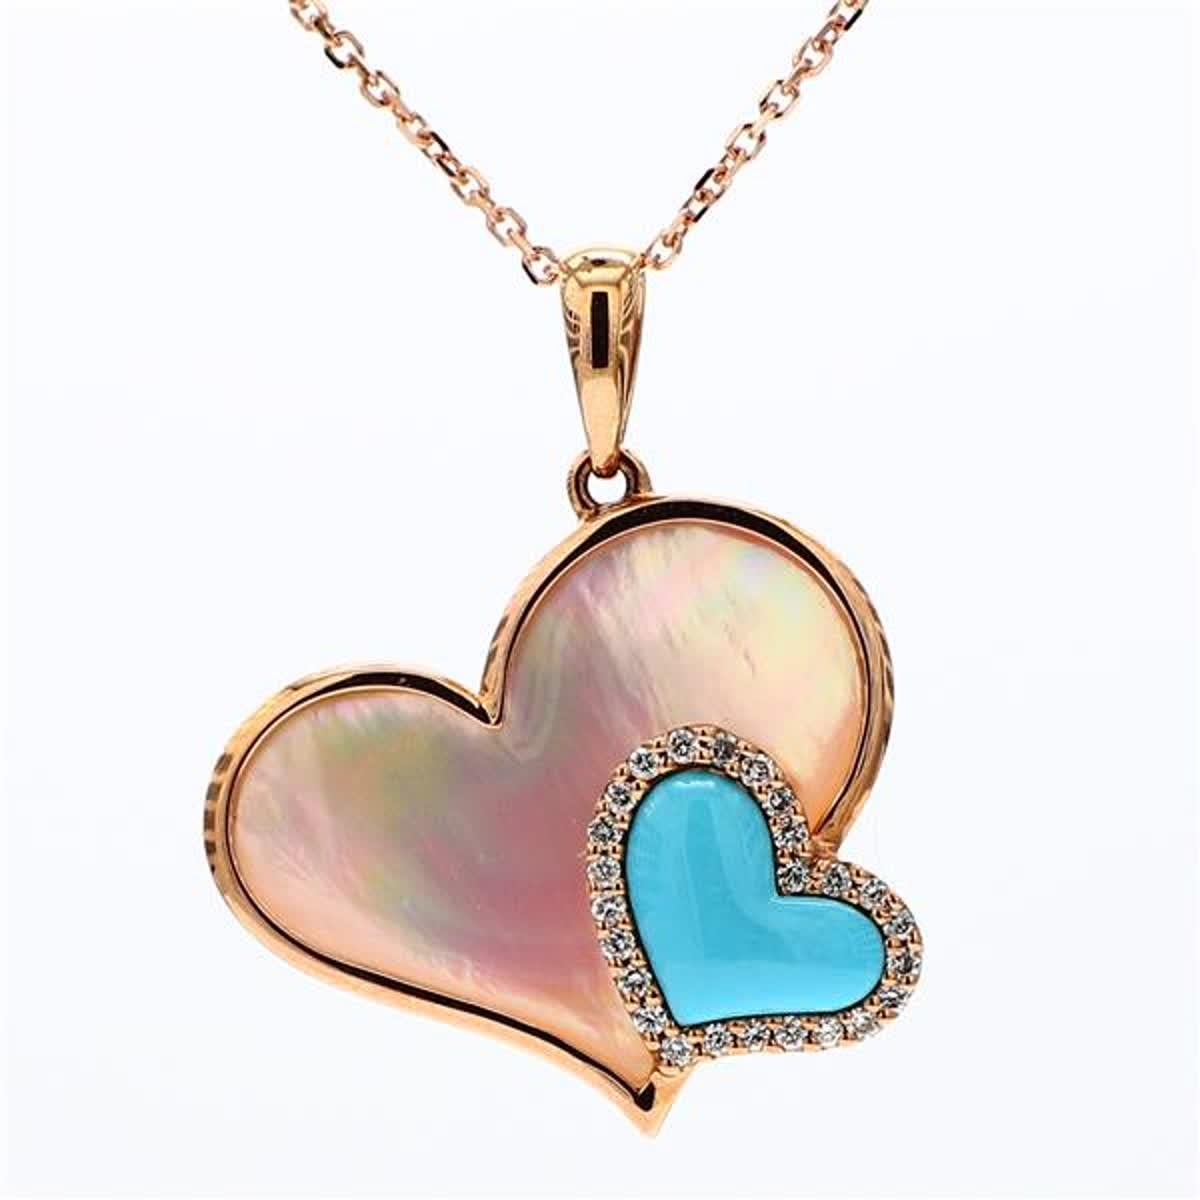 RareGemWorld's classic pink shell and turquoise pendant. Mounted in a beautiful 18K Rose Gold setting with a heart shape natural turquoise and a heart shape natural pink shell. The center pieces are complimented by natural round white diamond melee.